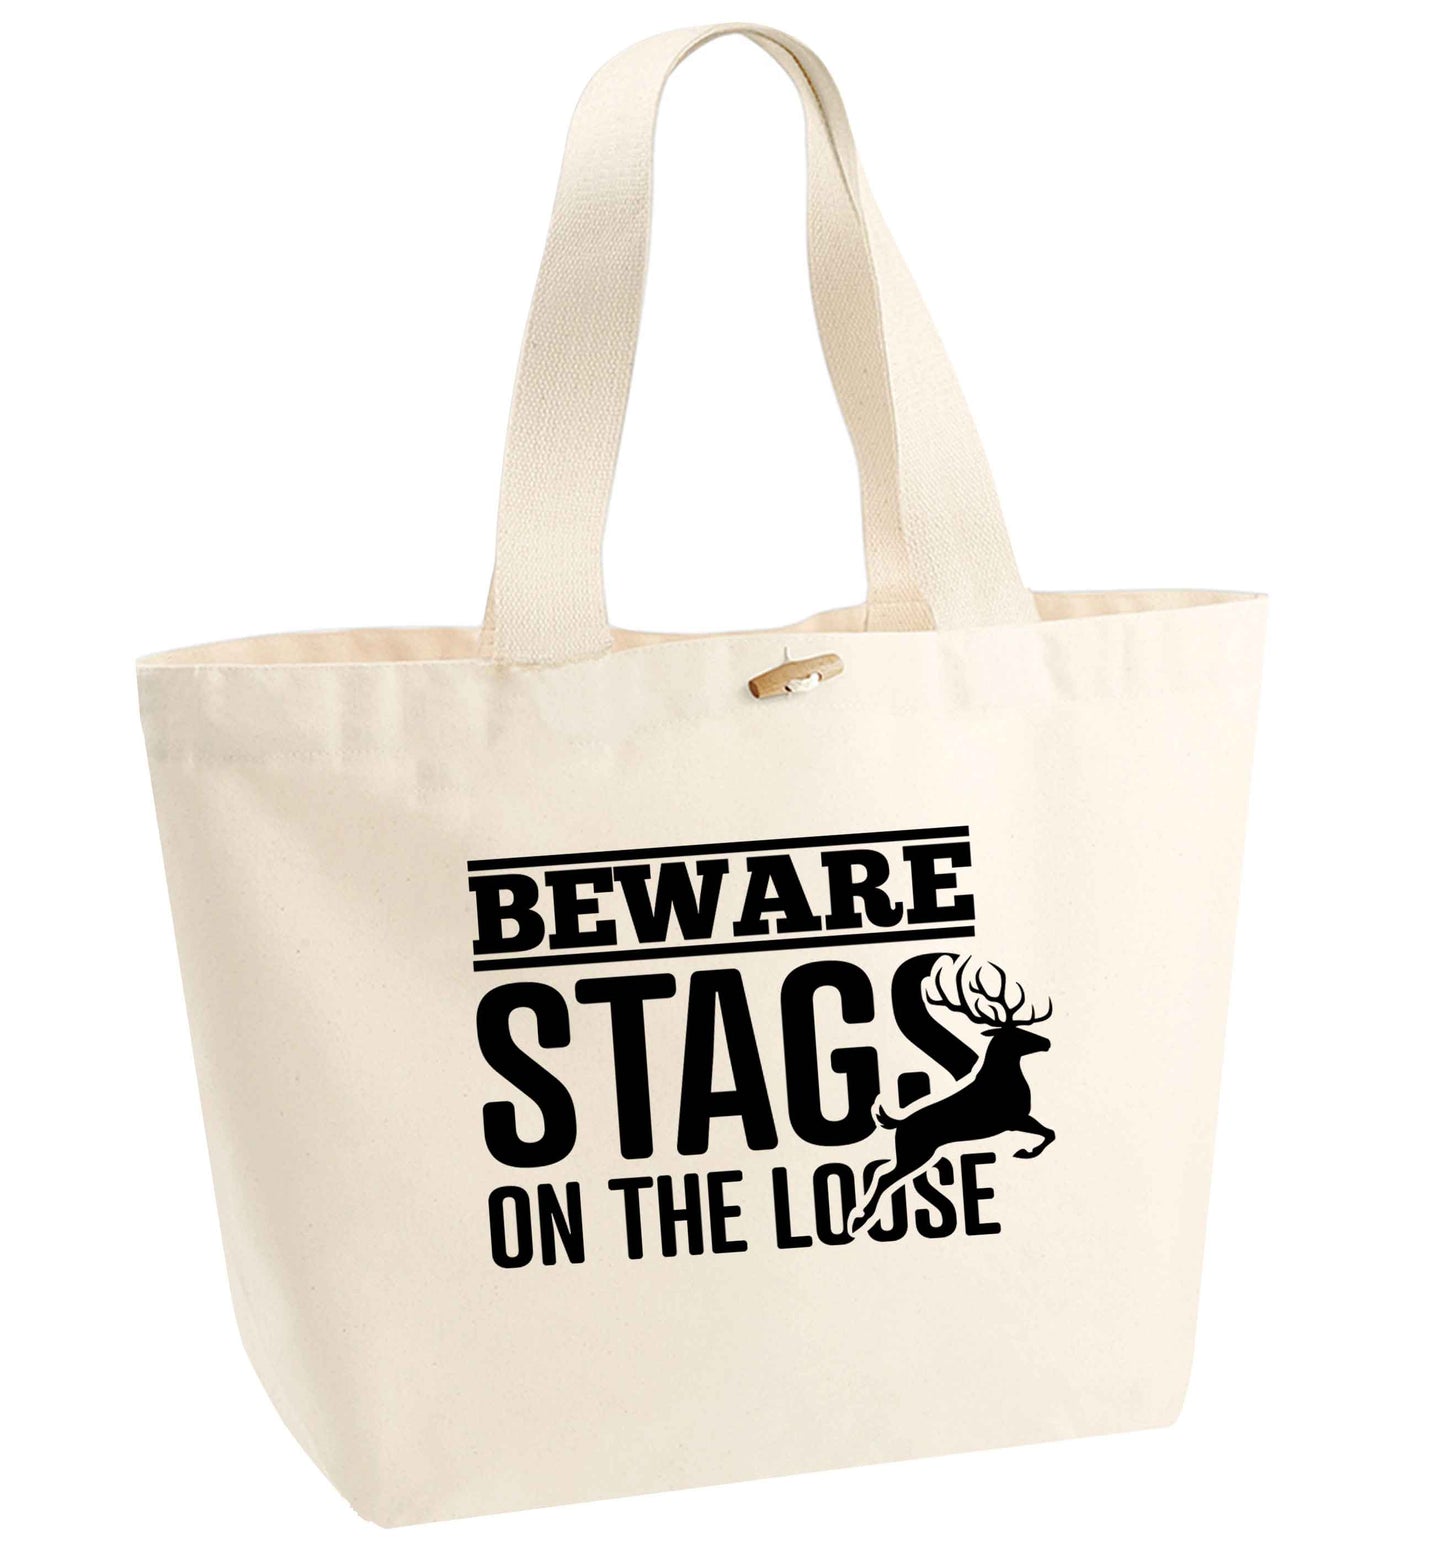 Beware stags on the loose organic cotton premium tote bag with wooden toggle in natural